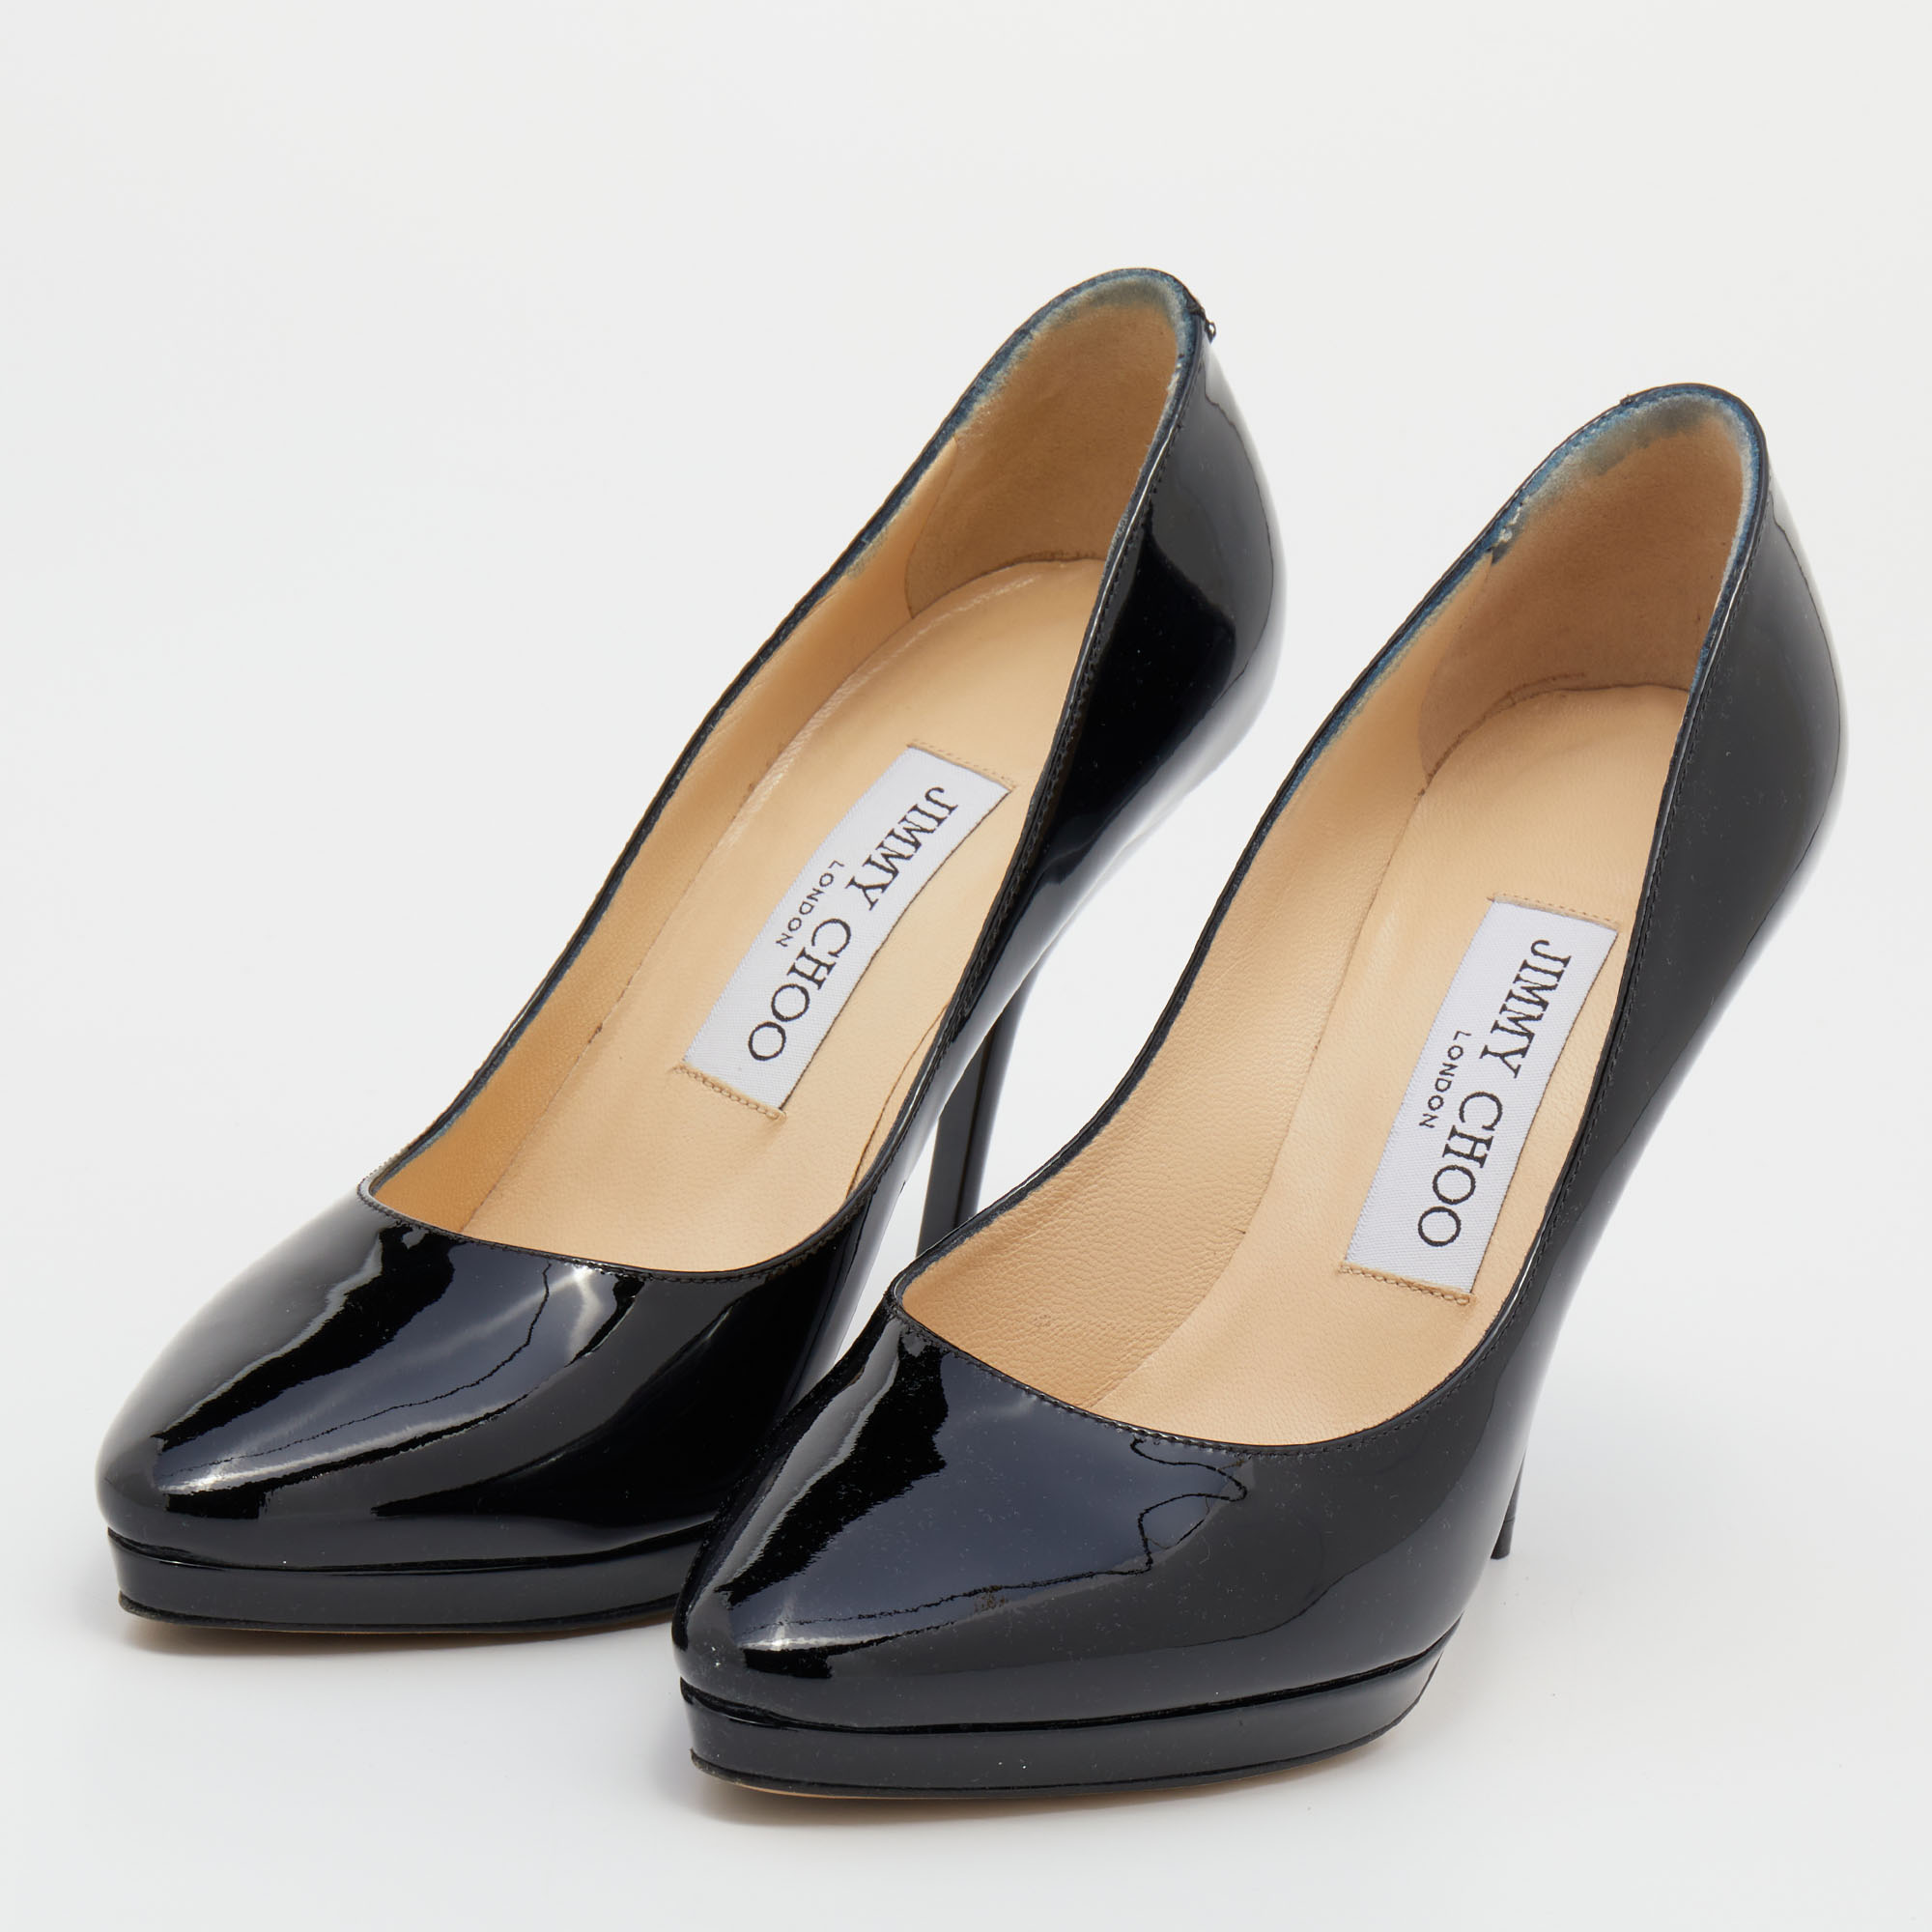 Jimmy Choo Black Patent Leather Anouk Pointed Toe Pumps Size